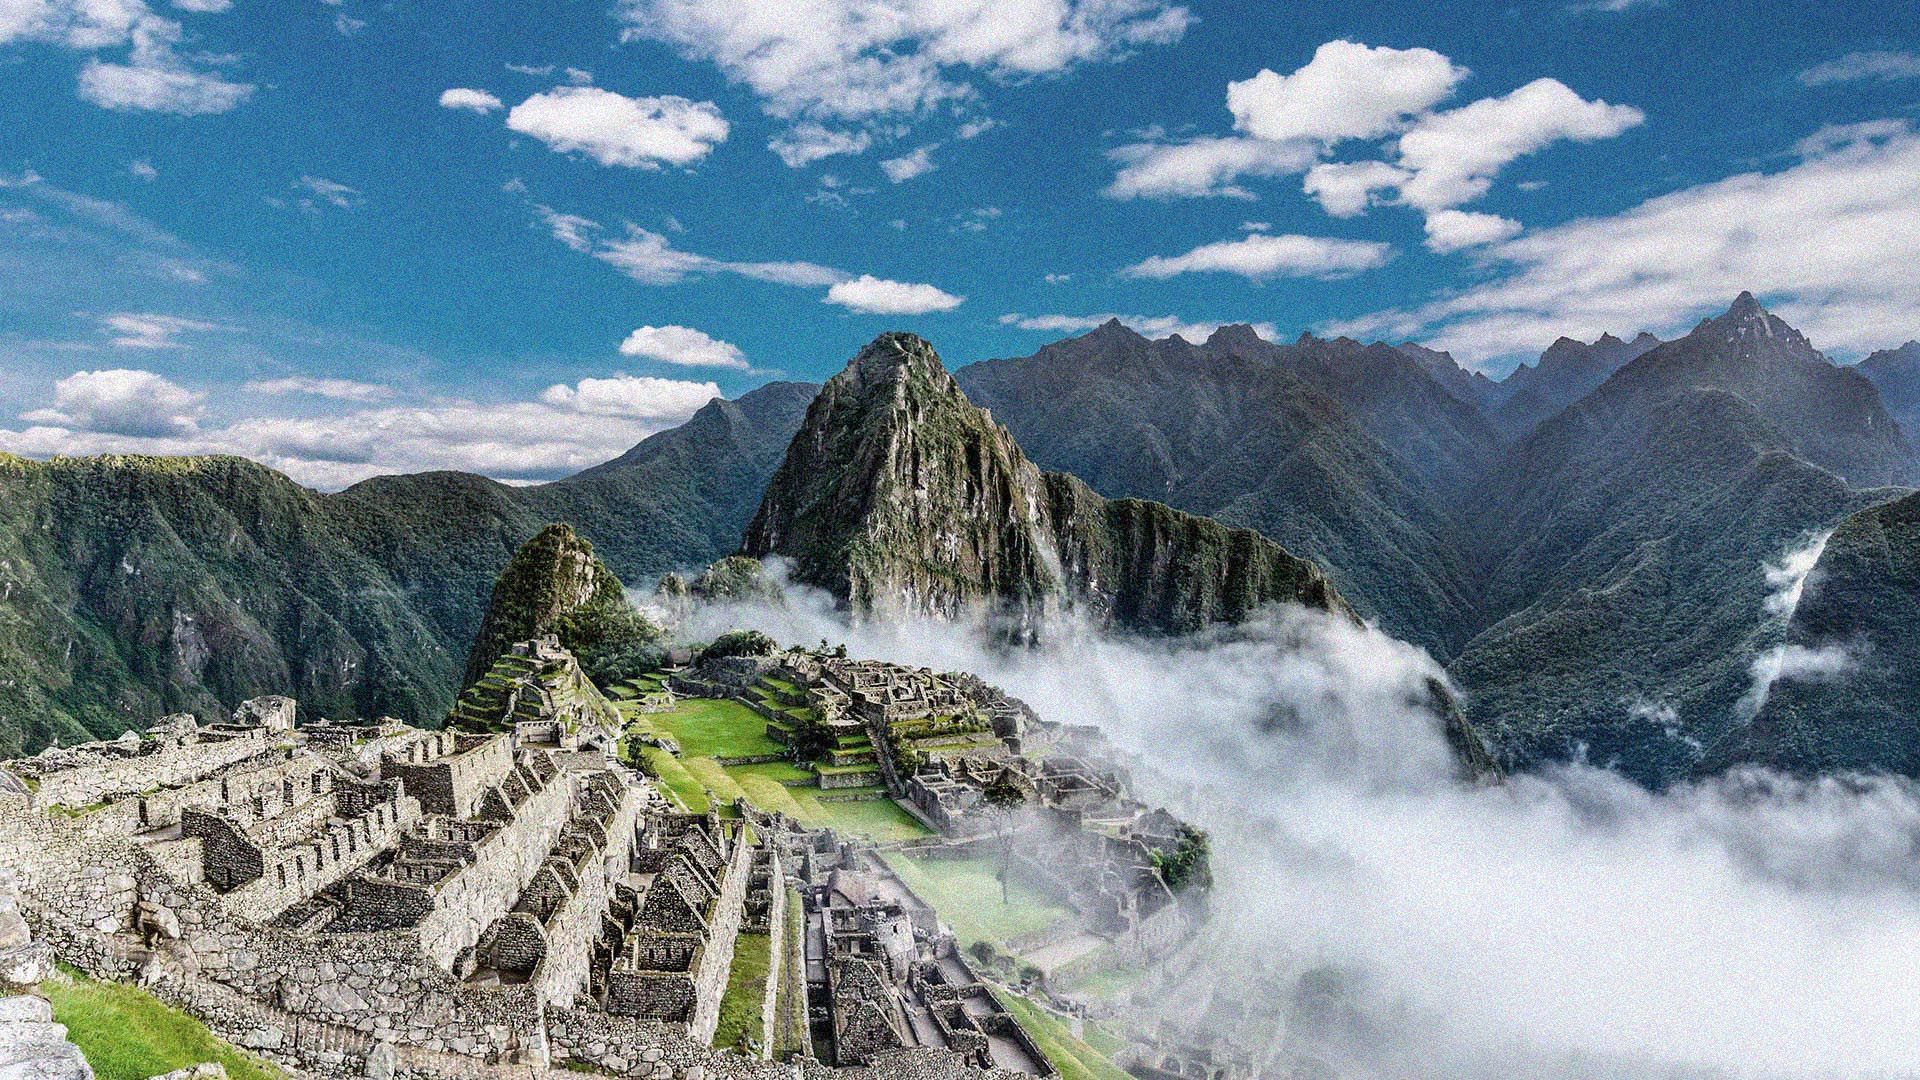 Epic, wide photo showing the stunning view of the ancient archaeological site of Machu Picchu in Peru.